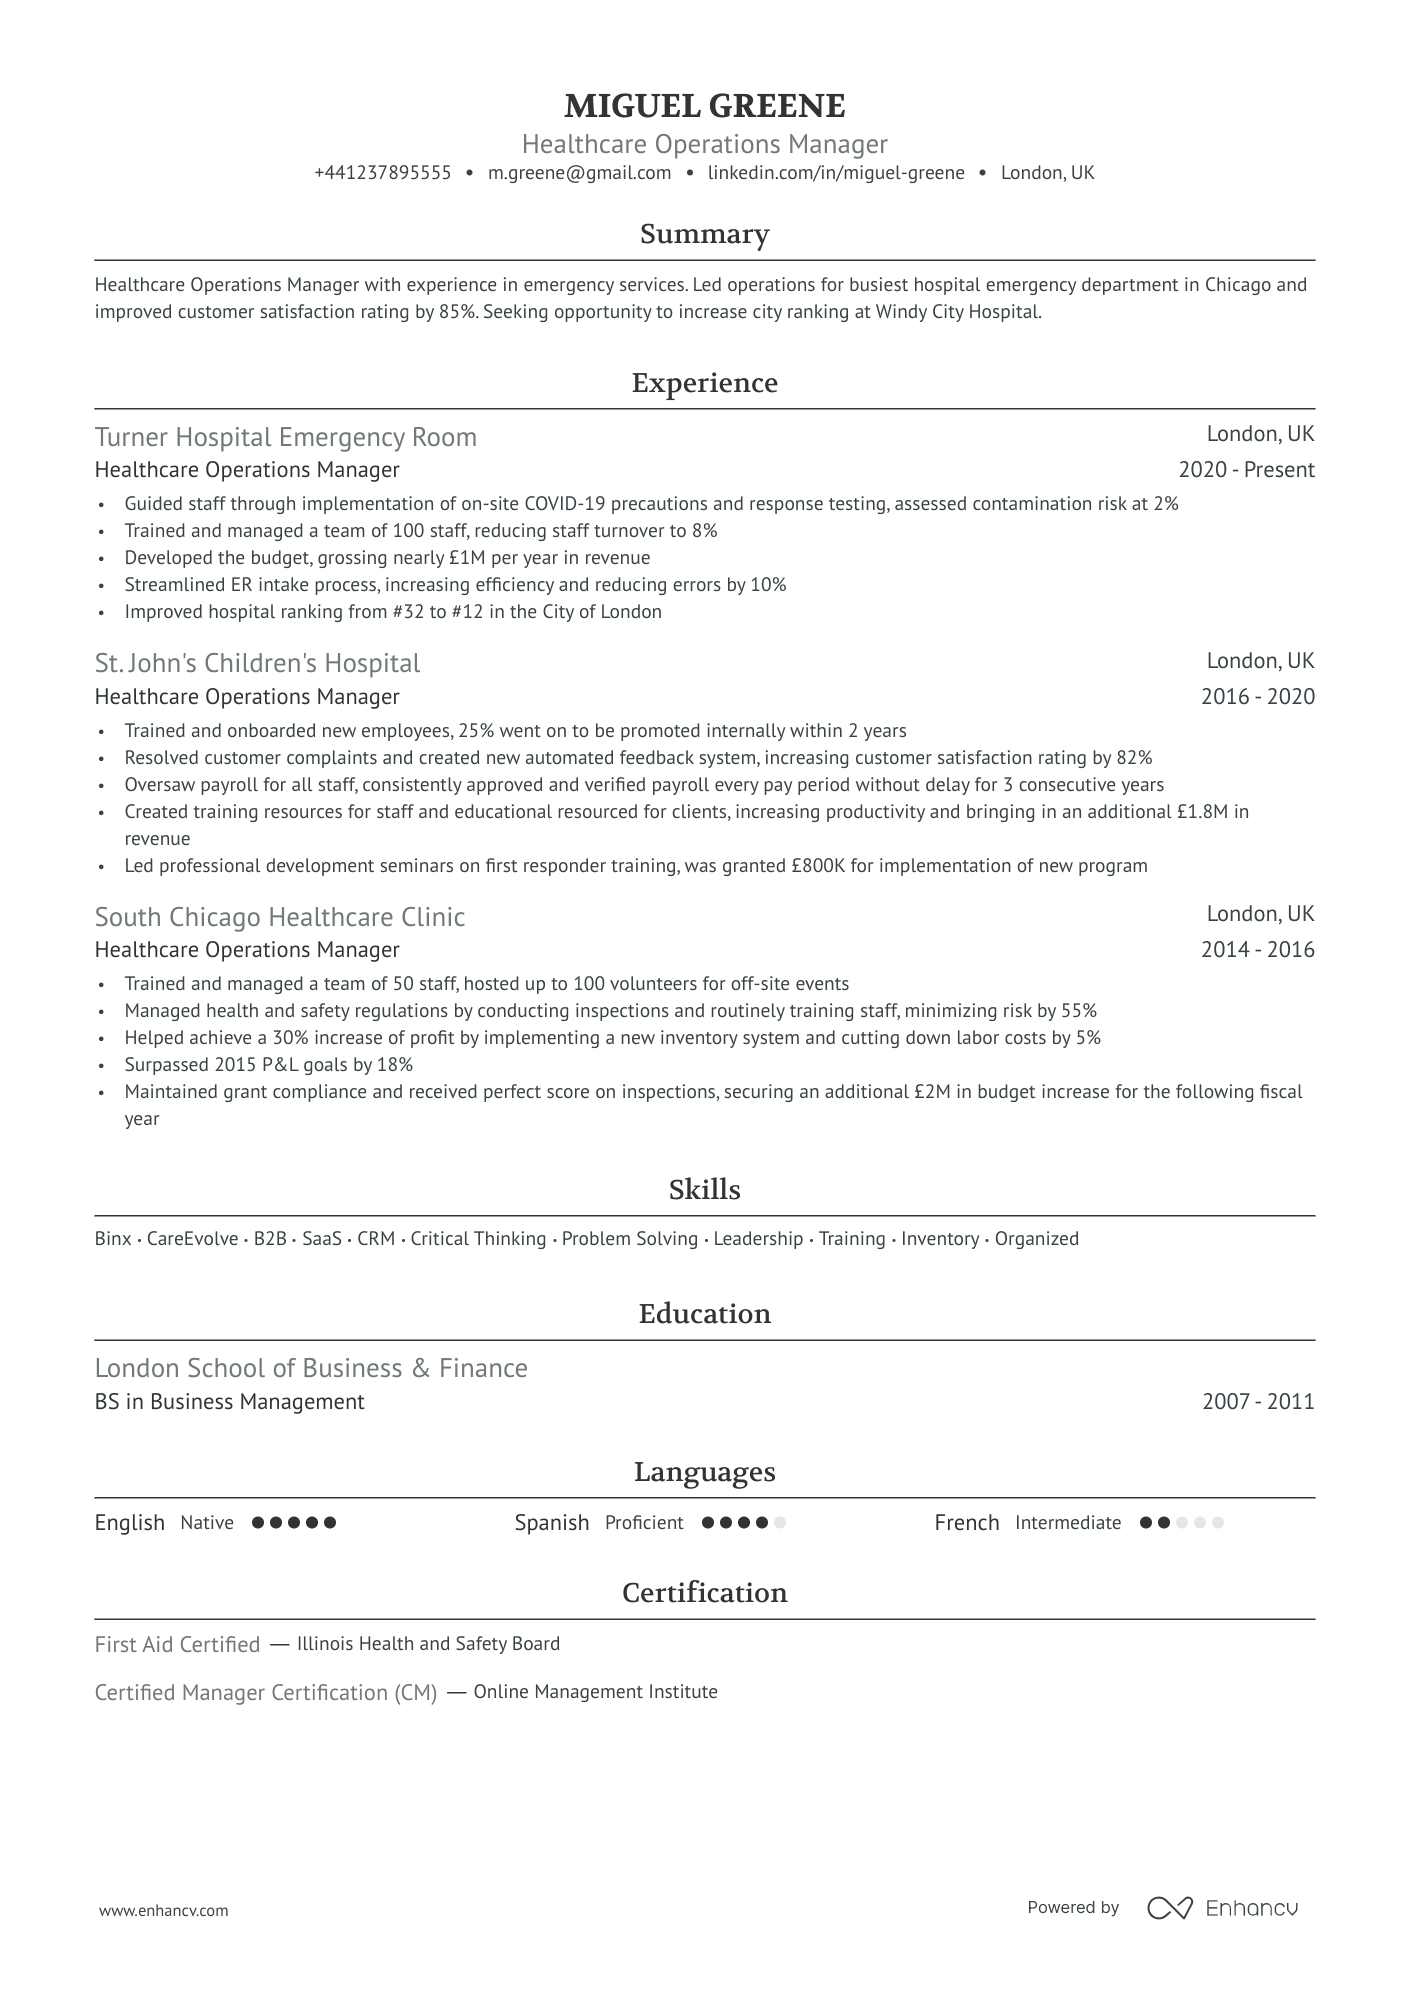 Healthcare Operations Manager CV example